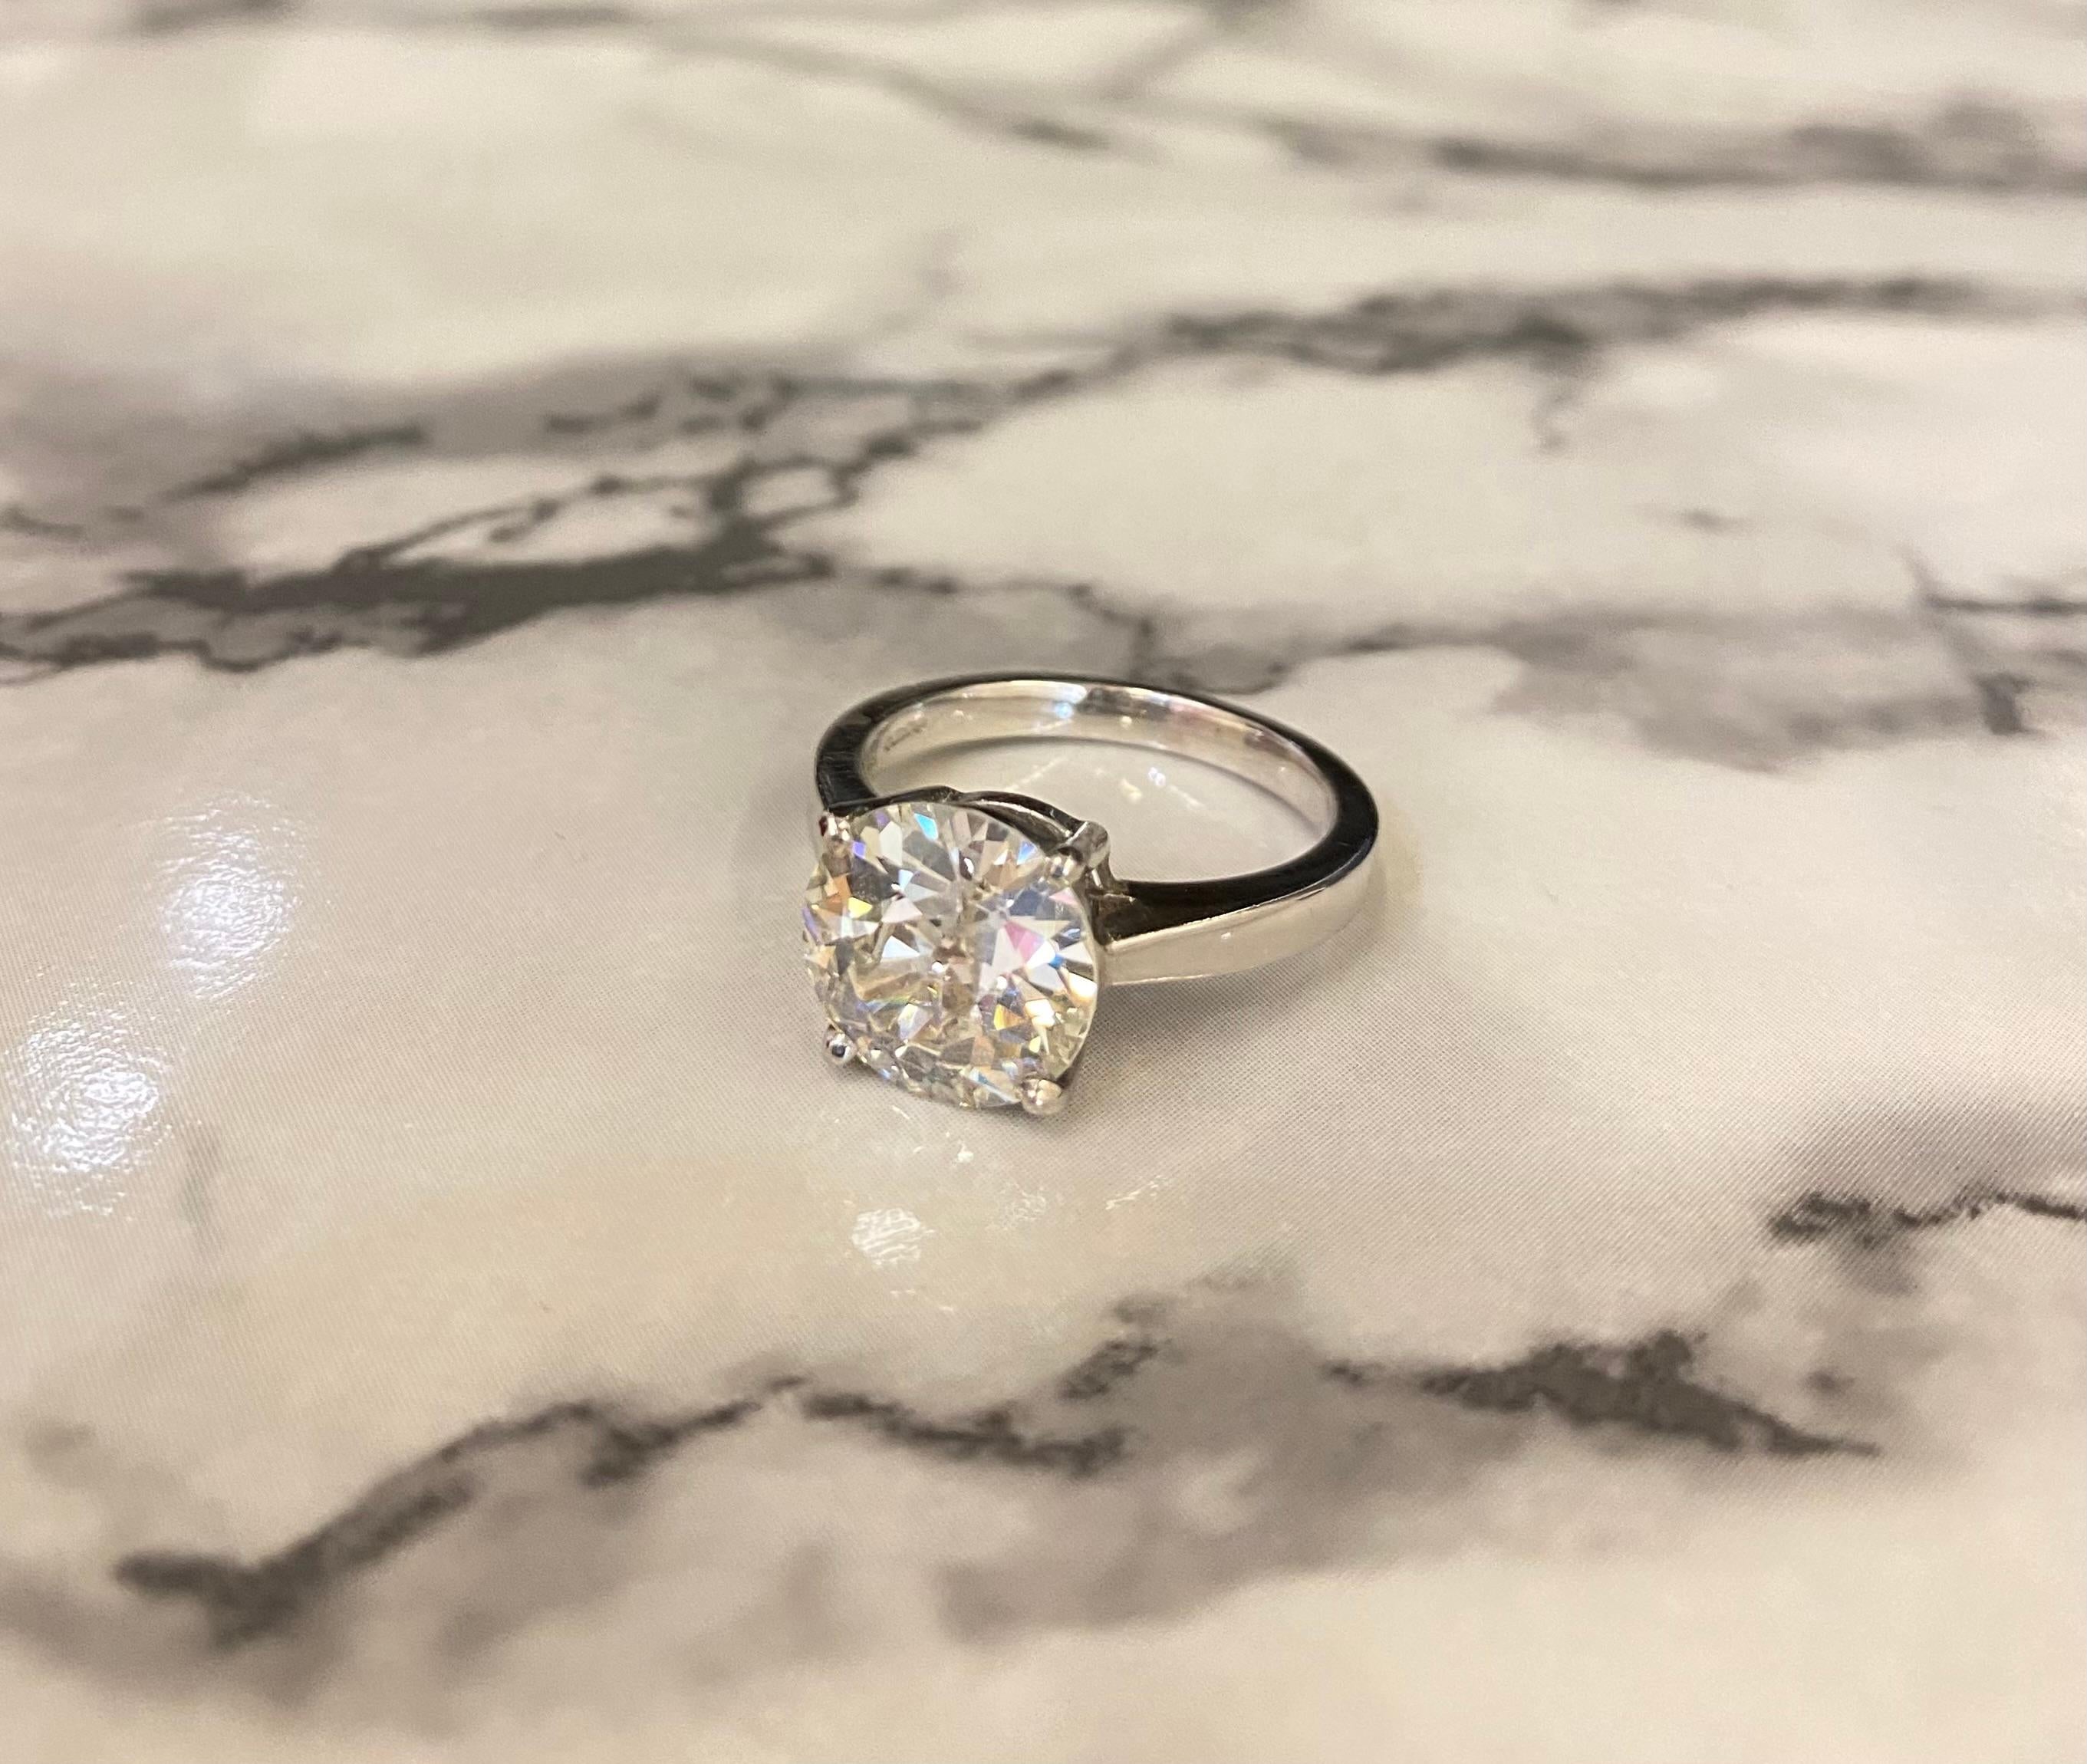 This exquisite 3.45 carat Old Miner Cut Diamond Ring is truly a timeless treasure. Crafted with utmost precision and attention to detail, this ring showcases the exceptional beauty and brilliance of a rare old miner cut diamond.

The centrepiece of